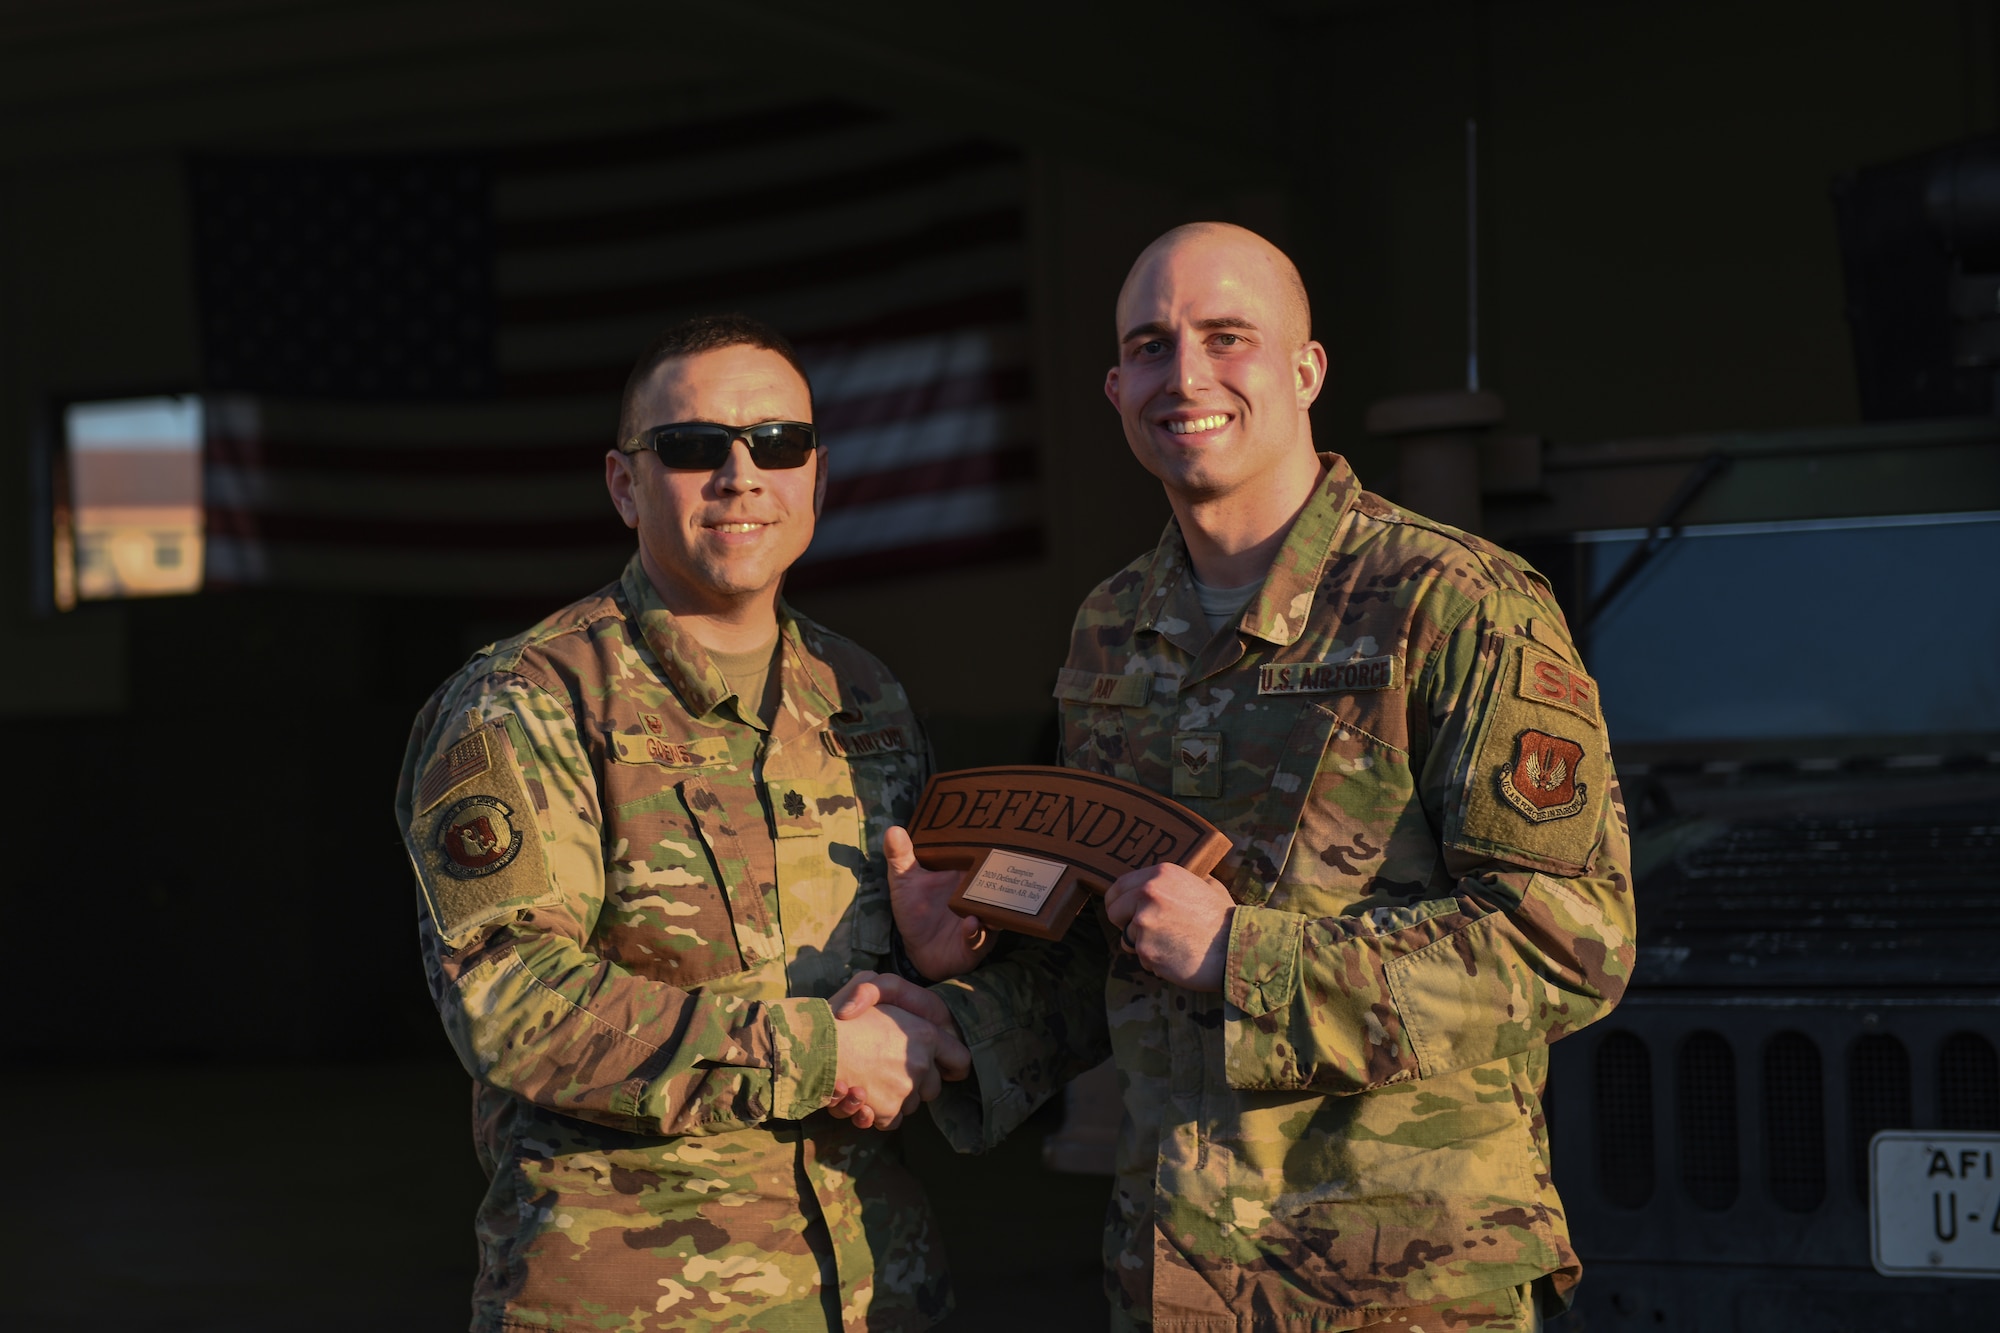 U.S. Air Force Lt. Col. Jesse Goens, 31st Security Forces Squadron commander, presents Aviano’s 2020 Defender Challenge award to Senior Airman Christopher L. Ray, 31st SFS member at Aviano Air Base, Italy, Feb. 14, 2020. Ray won first place. (U.S. Air Force photo by Airman 1st Class Ericka A. Woolever)